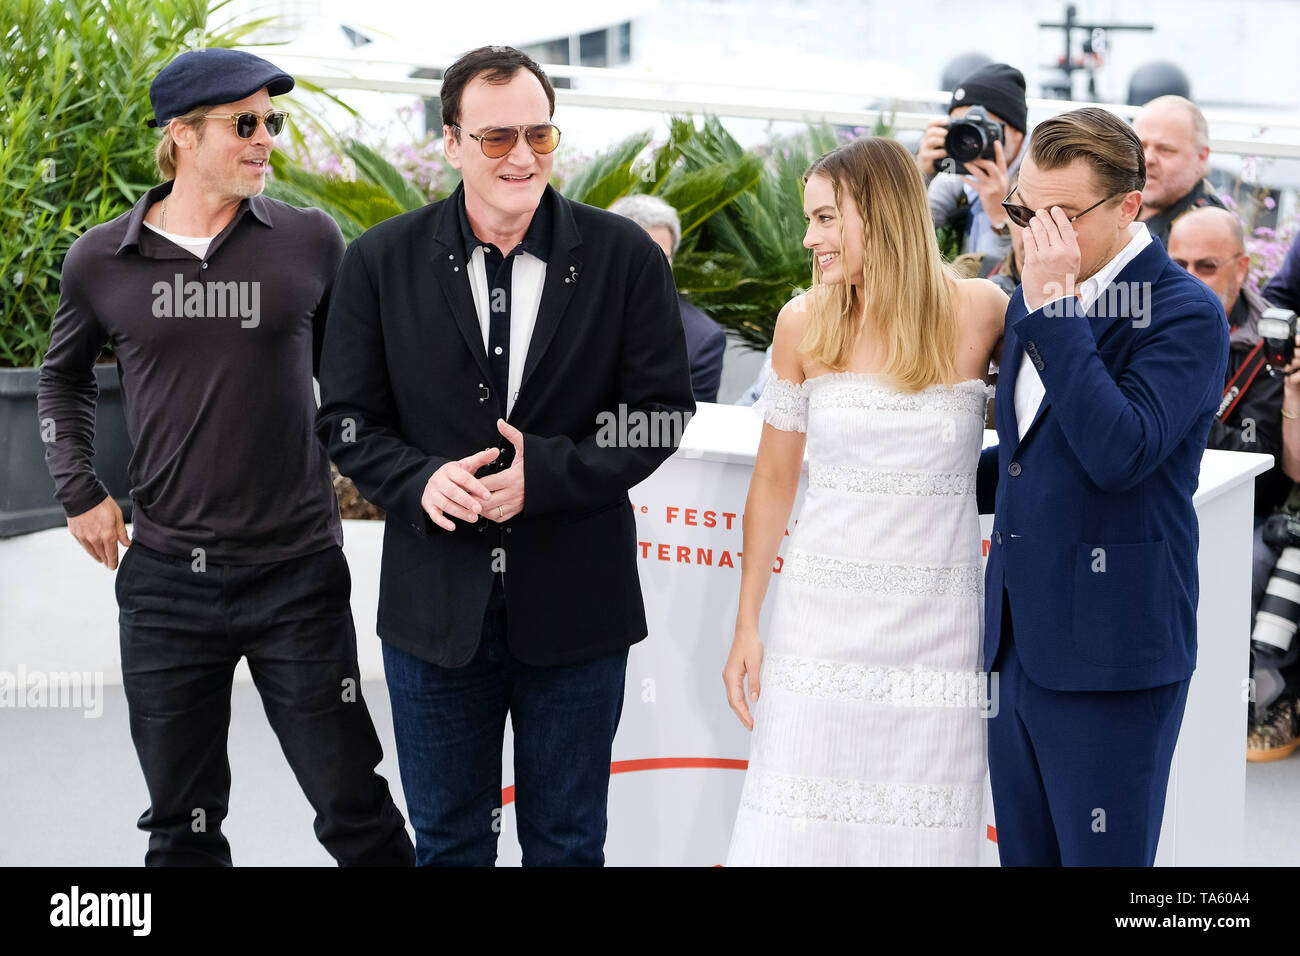 Cannes France 22nd May 19 Cast Poses At A Photocall For Once Upon A Time In Hollywood On Wednesday 22 May 19 At The 72nd Festival De Cannes Palais Des Festivals Cannes